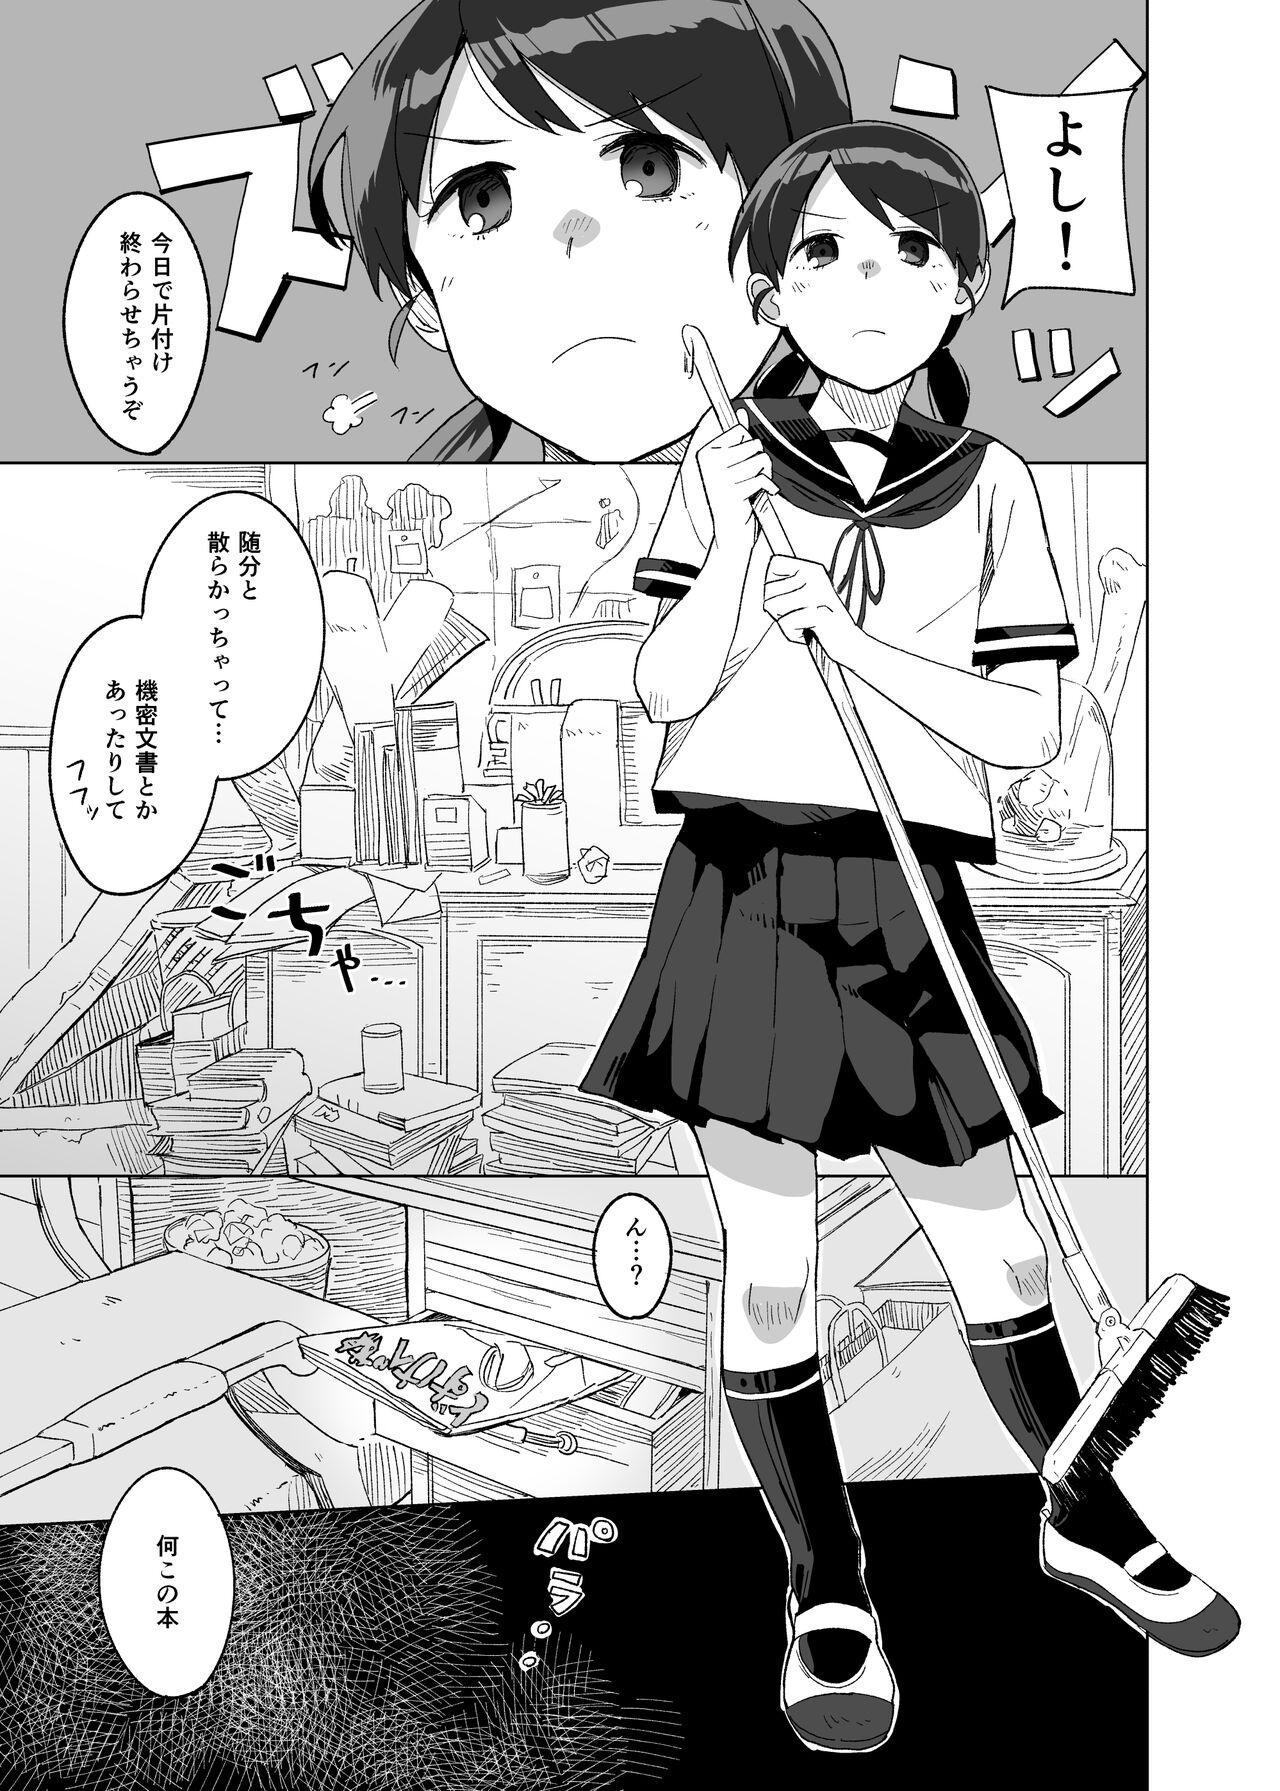 Dirty Talk Tanpopo - Kantai collection Sixtynine - Page 2